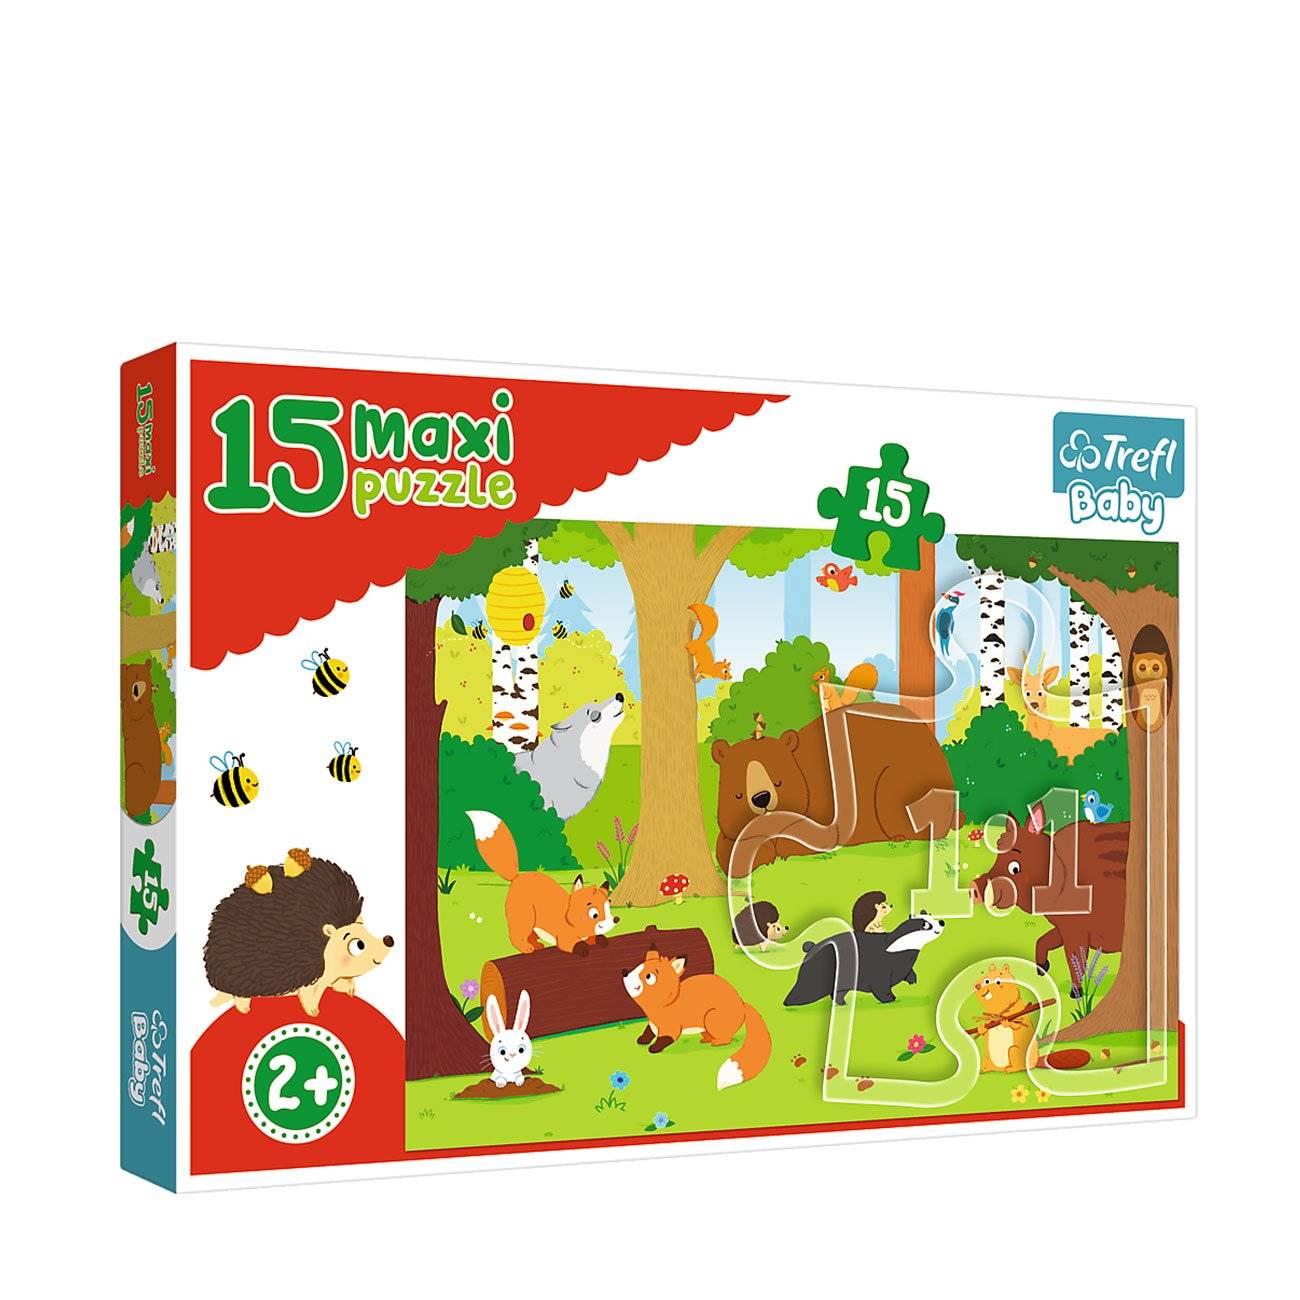 Puzzle Animals in the forest bestvalue.eu